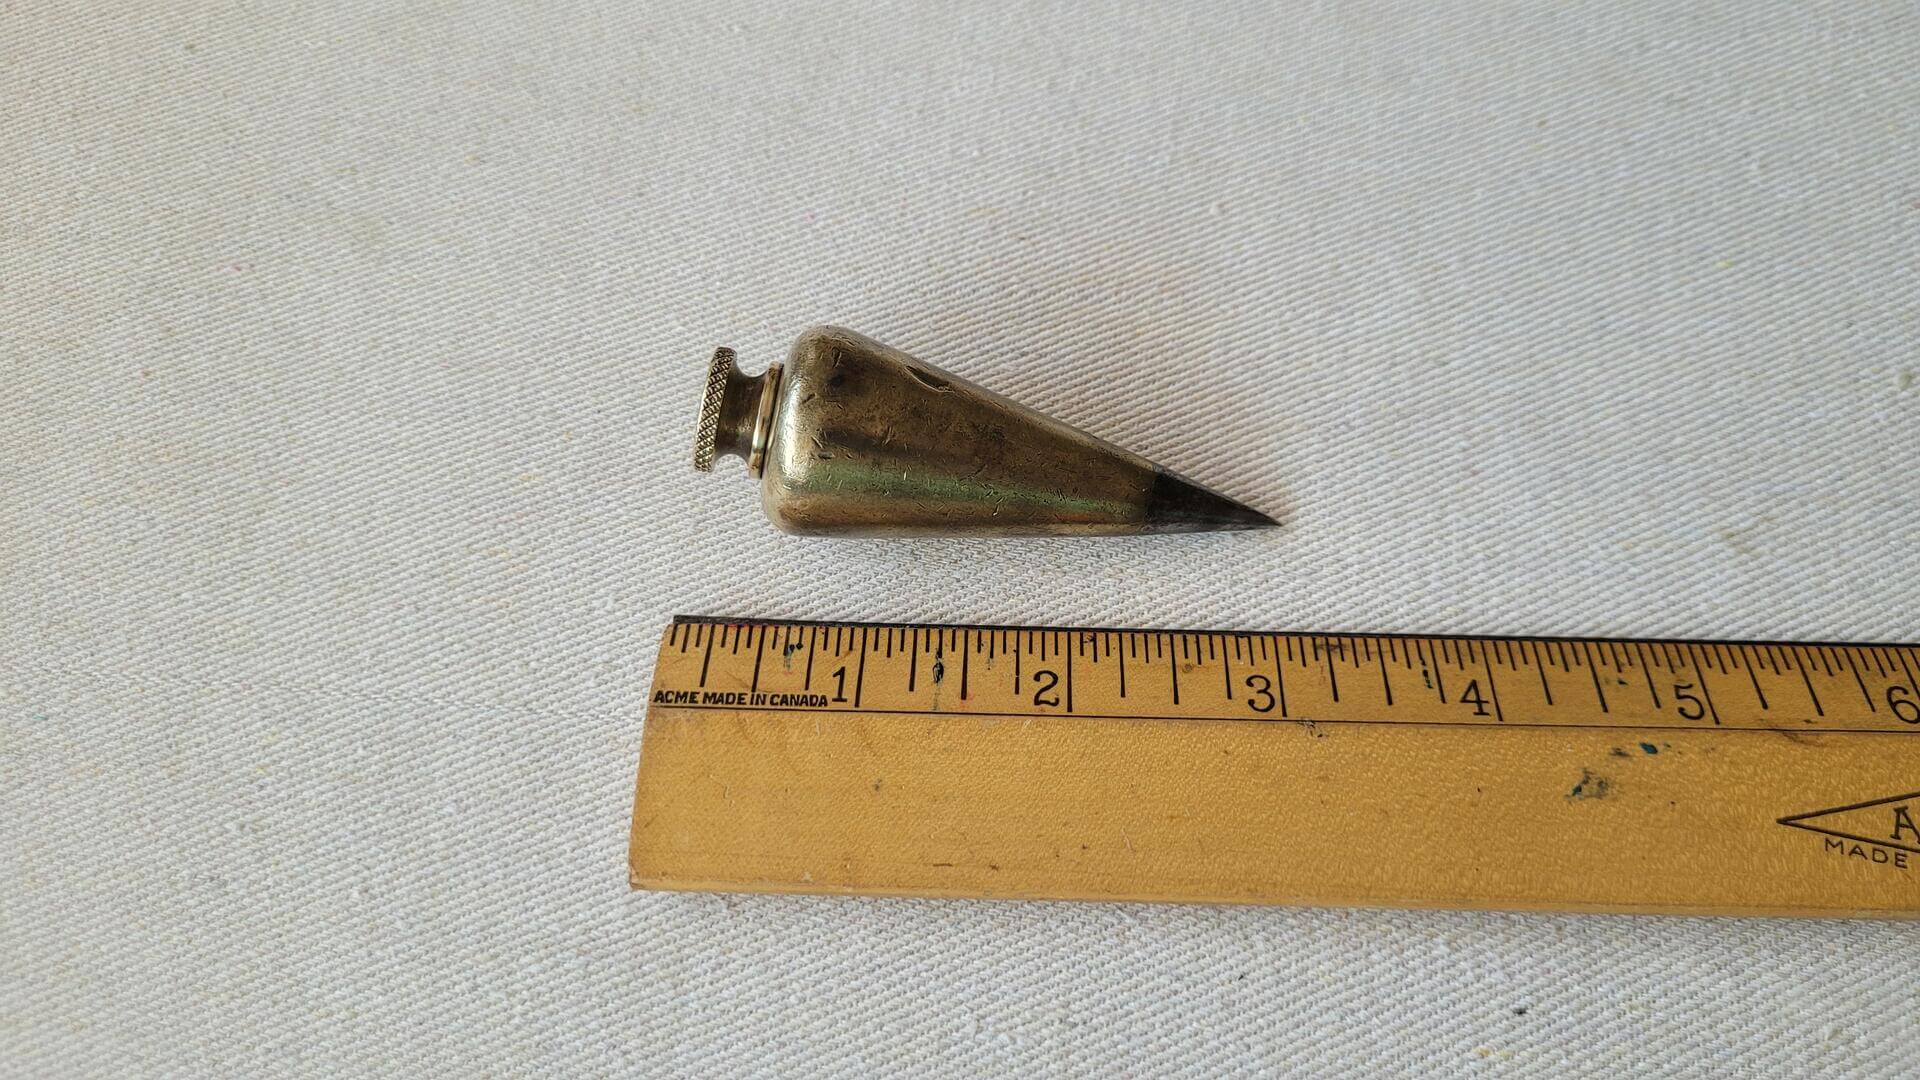 Beautiful antique turnip shaped solid brass plumb bob with the steel tip 5oz / 146g. Vintage marking and measuring collectible tools